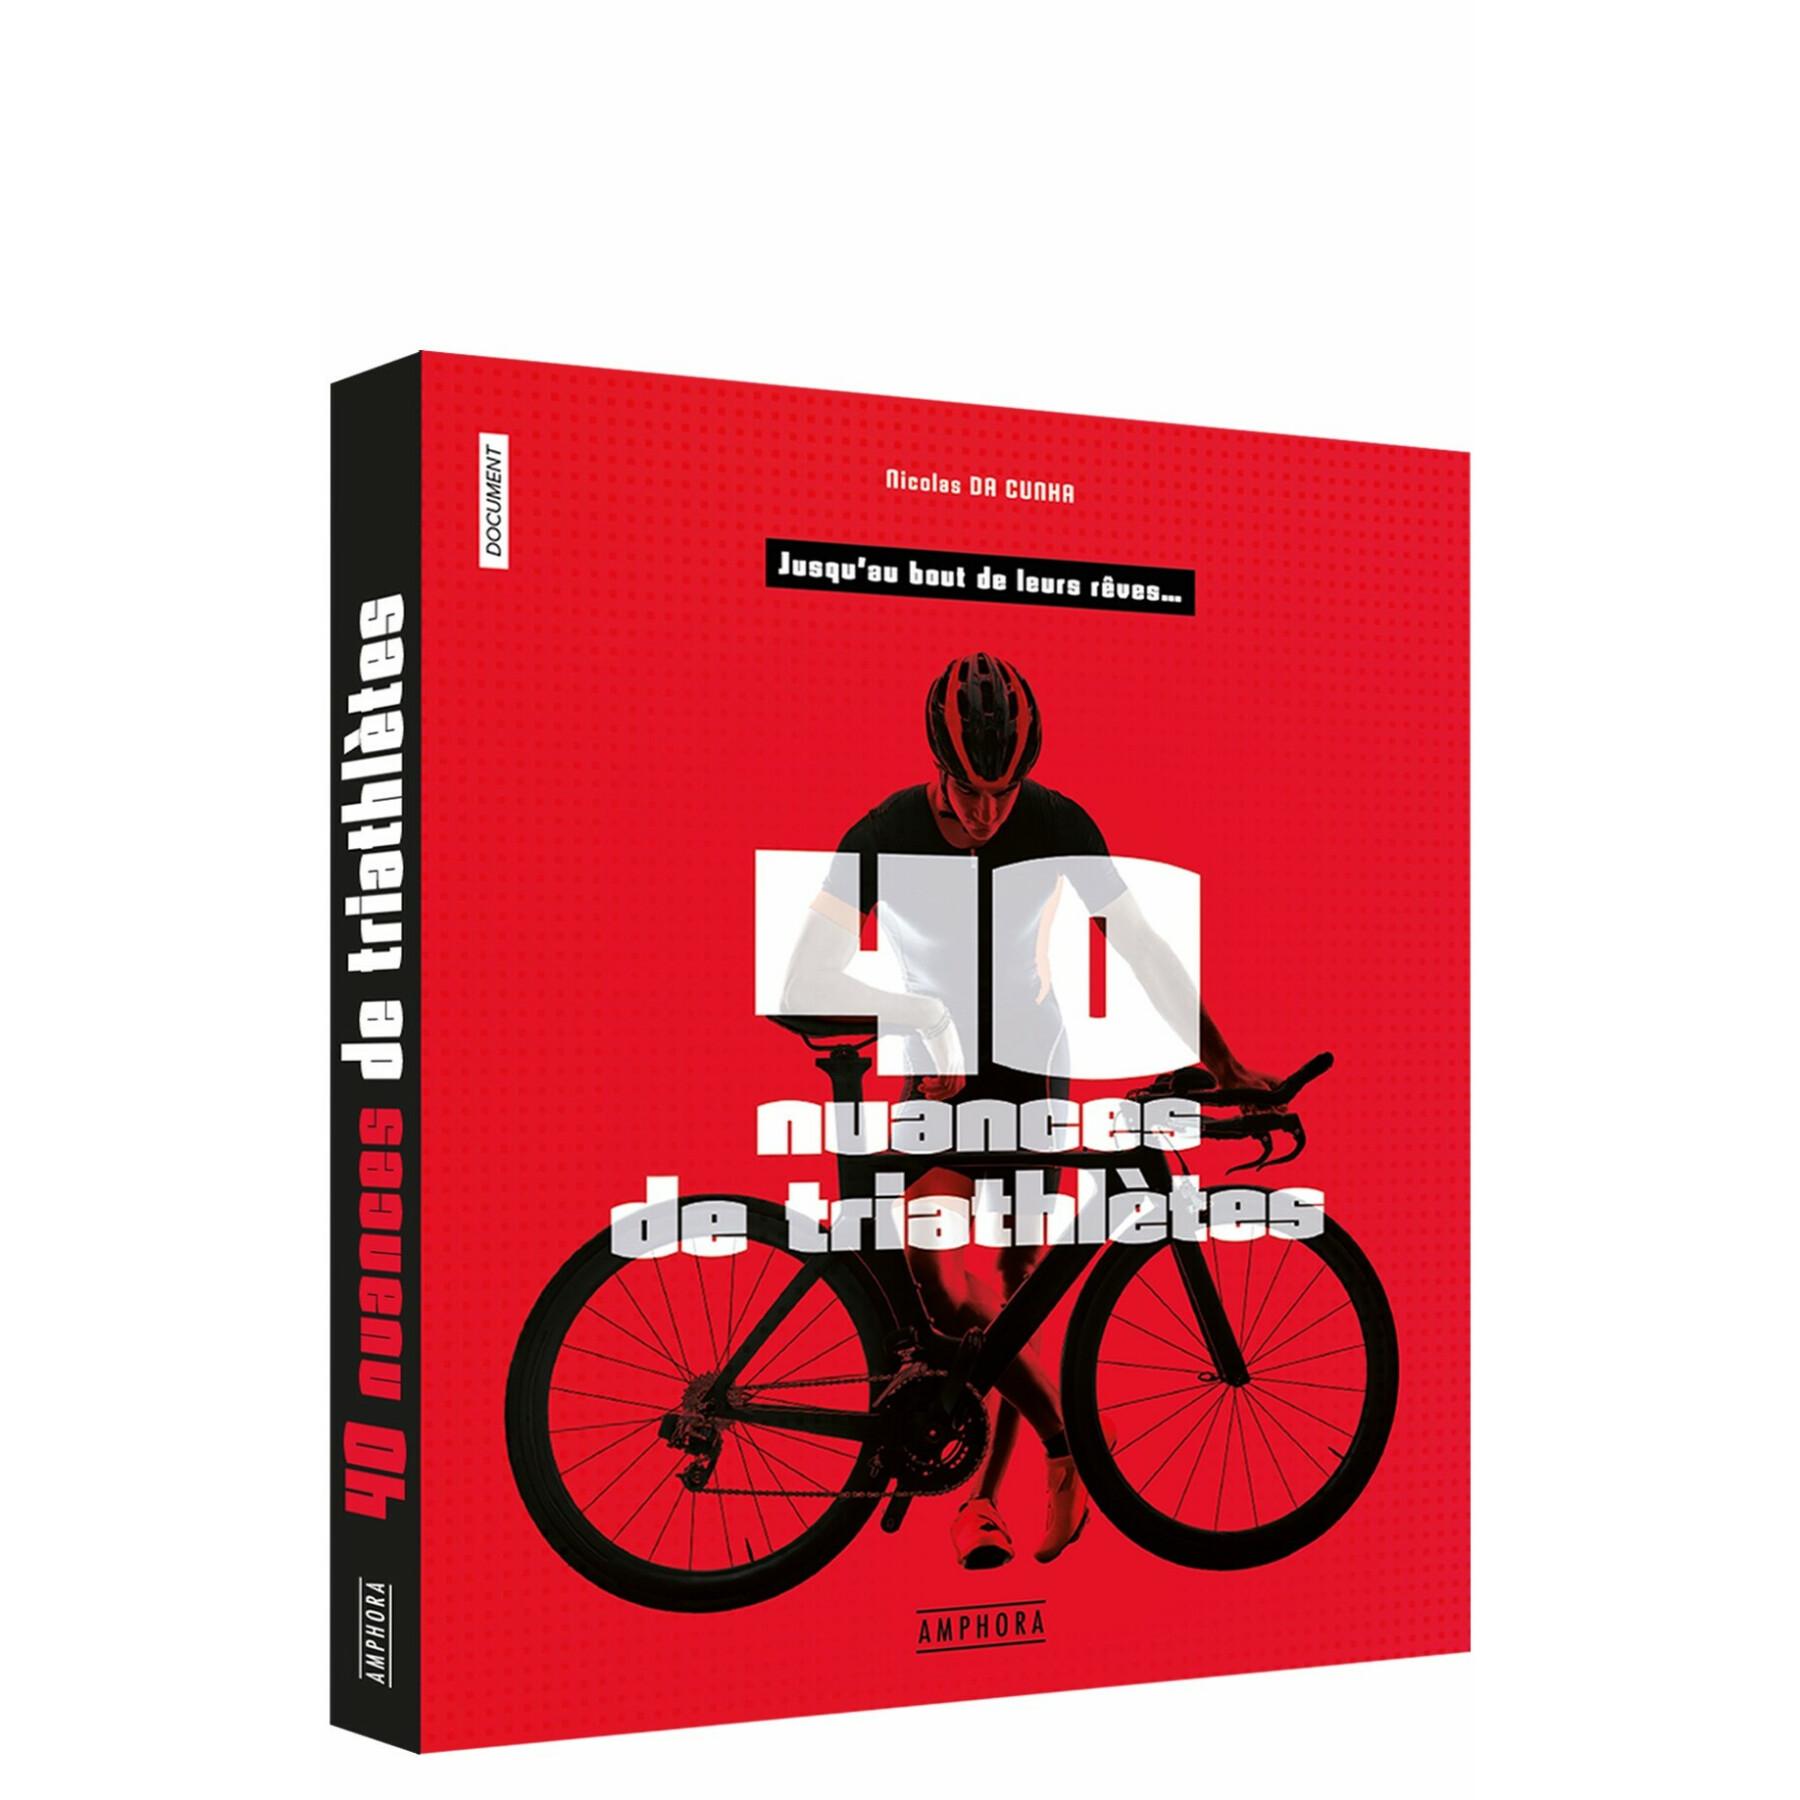 Forty shades of triathletes book Amphora